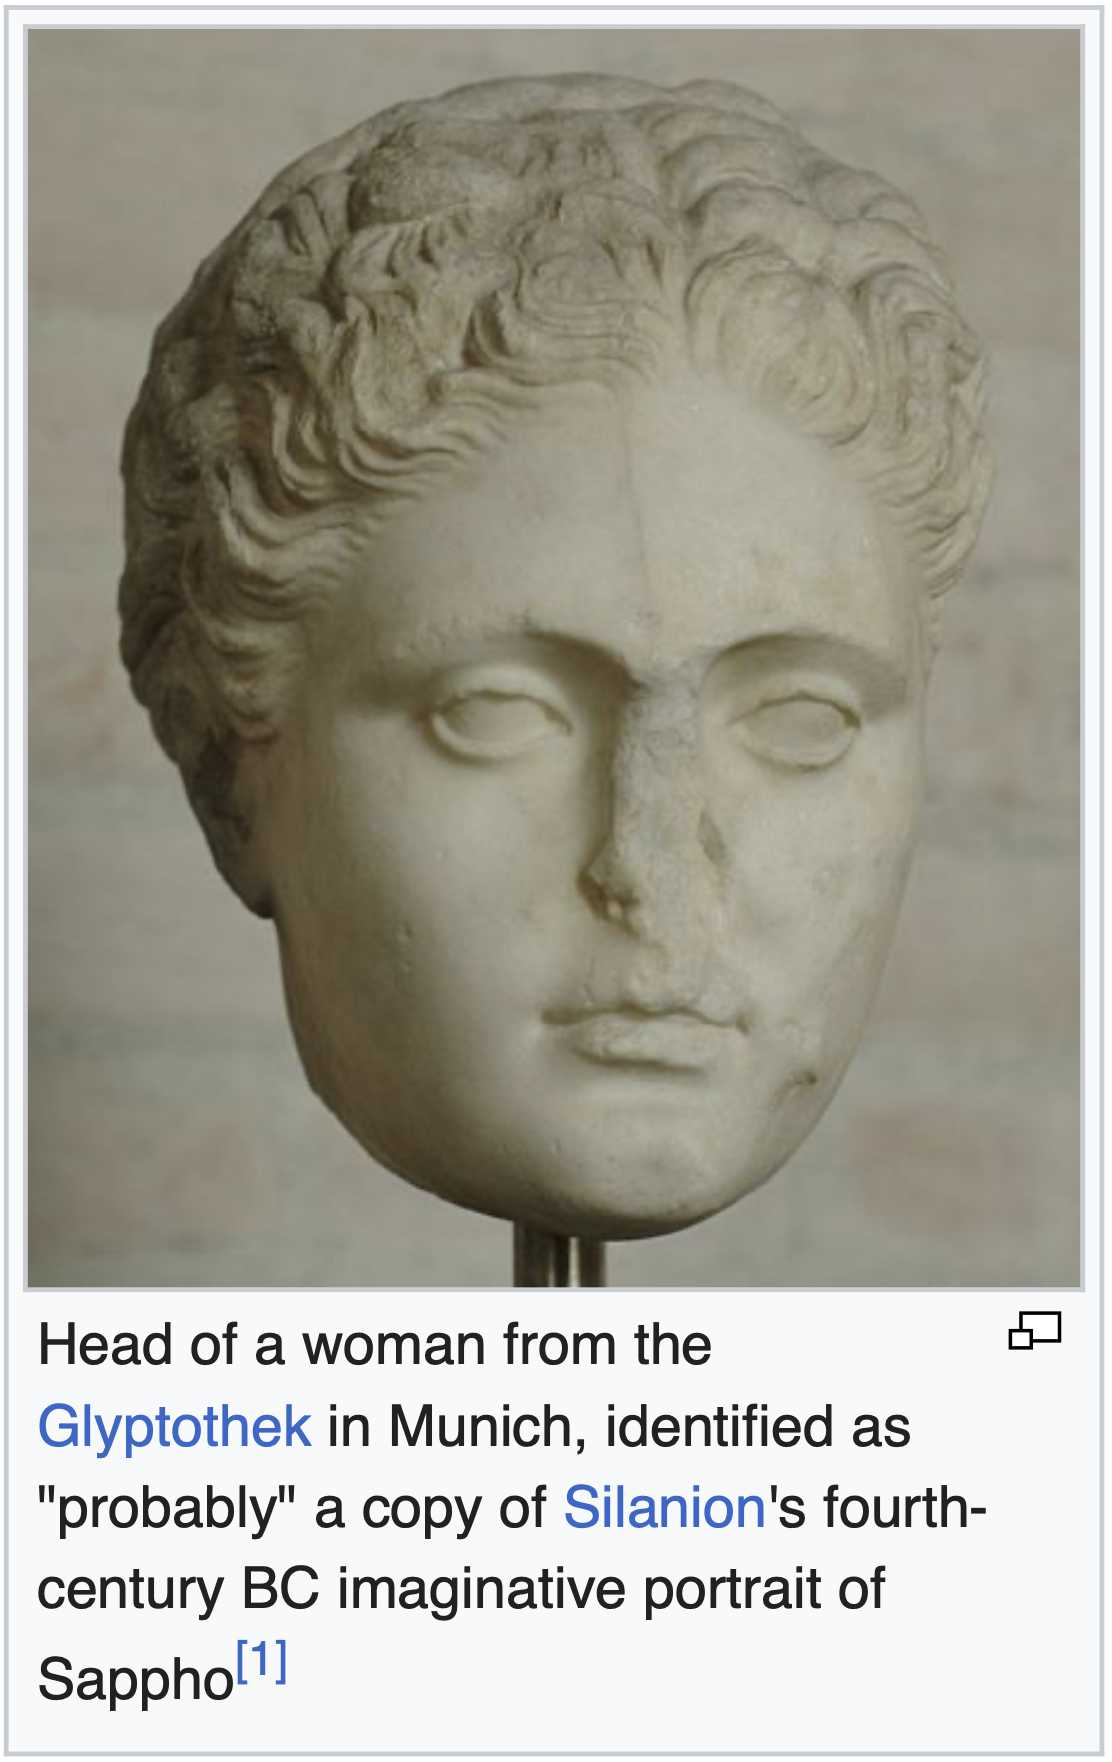 Head of a woman from the Glyptothek in Munich, identified as "probably" a copy of Silanion's fourth- century BC imaginative portrait of Sappho